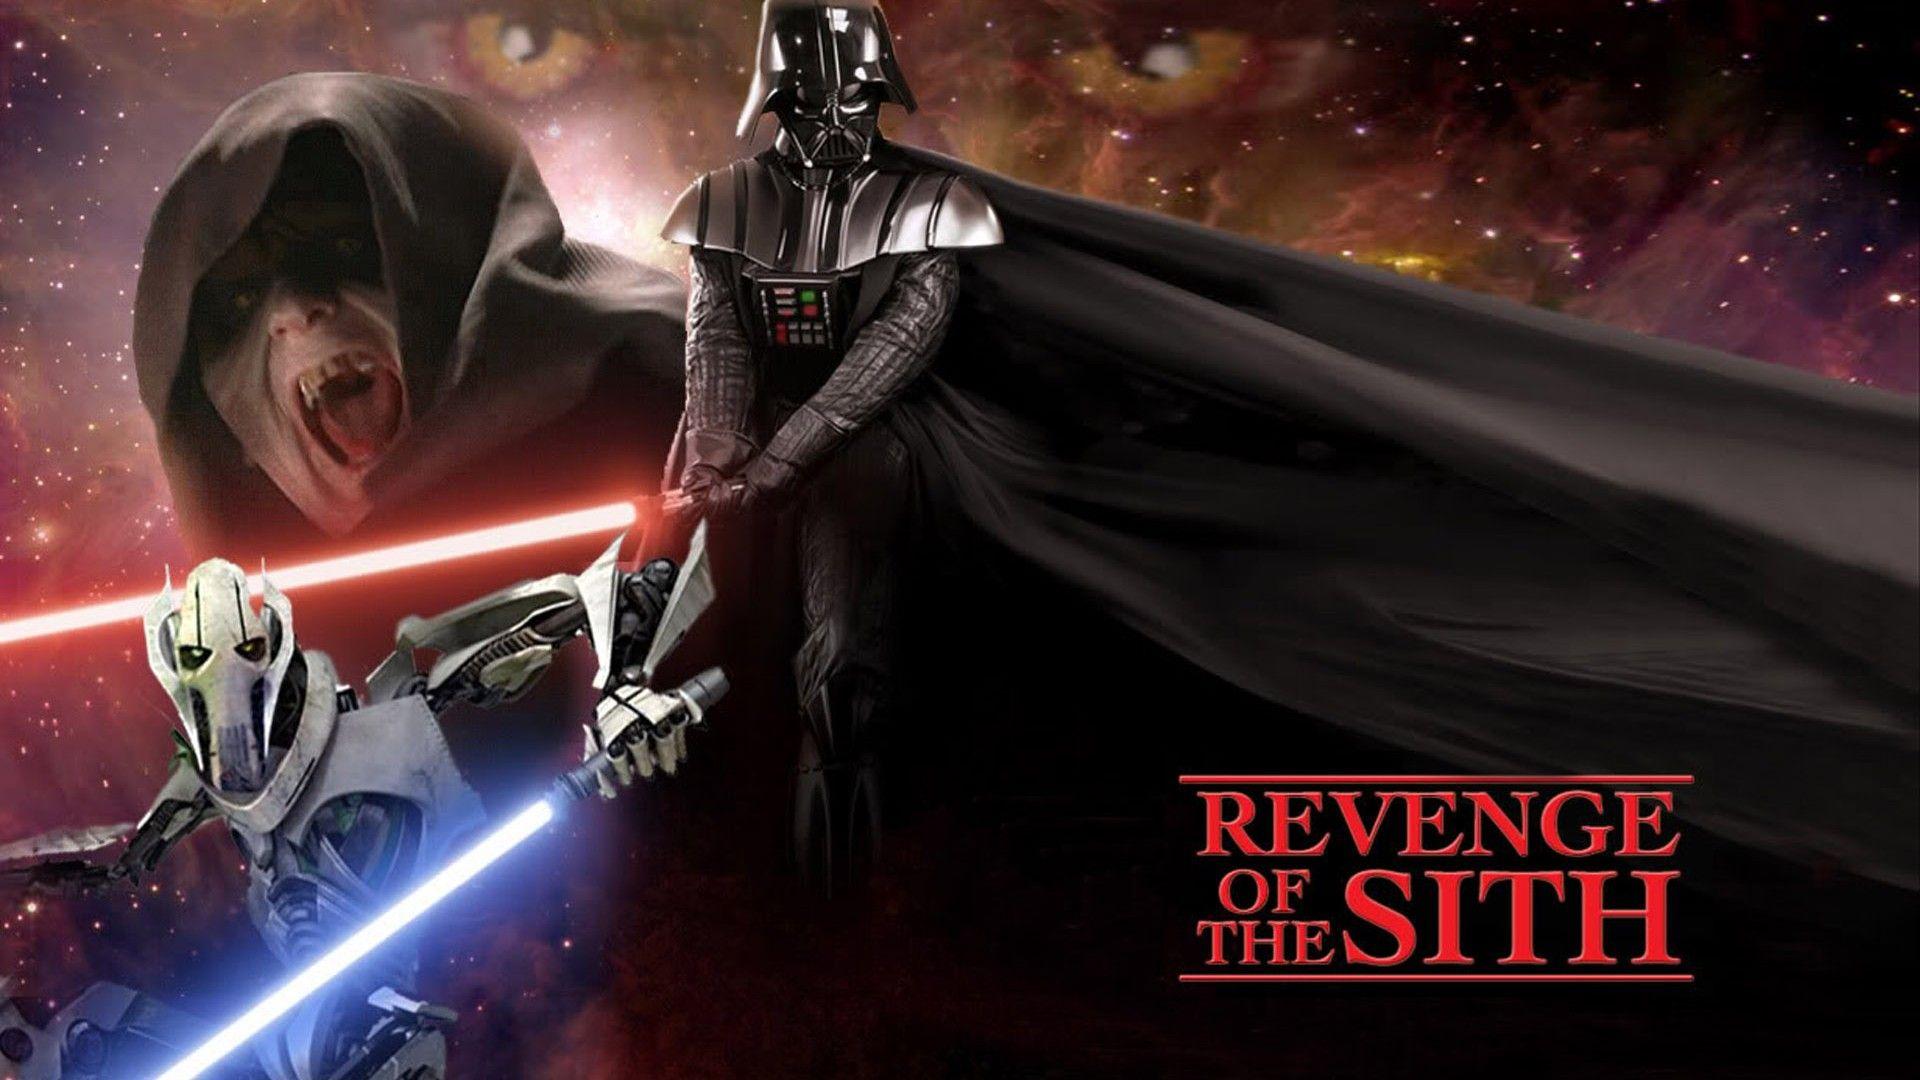 Star Wars Ep. III: Revenge of the Sith download the last version for windows